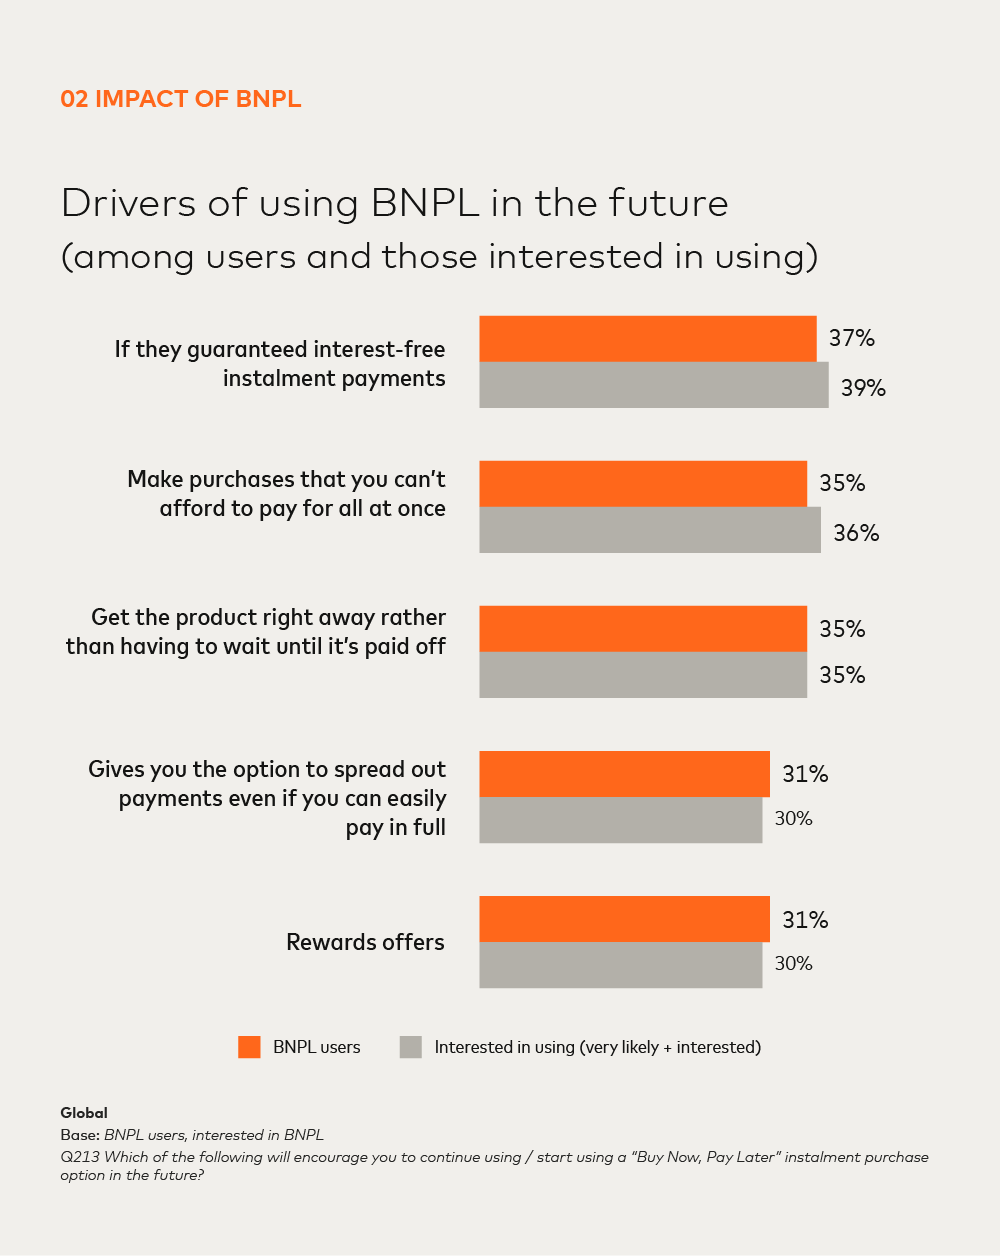 Drivers of using BNPL in the future